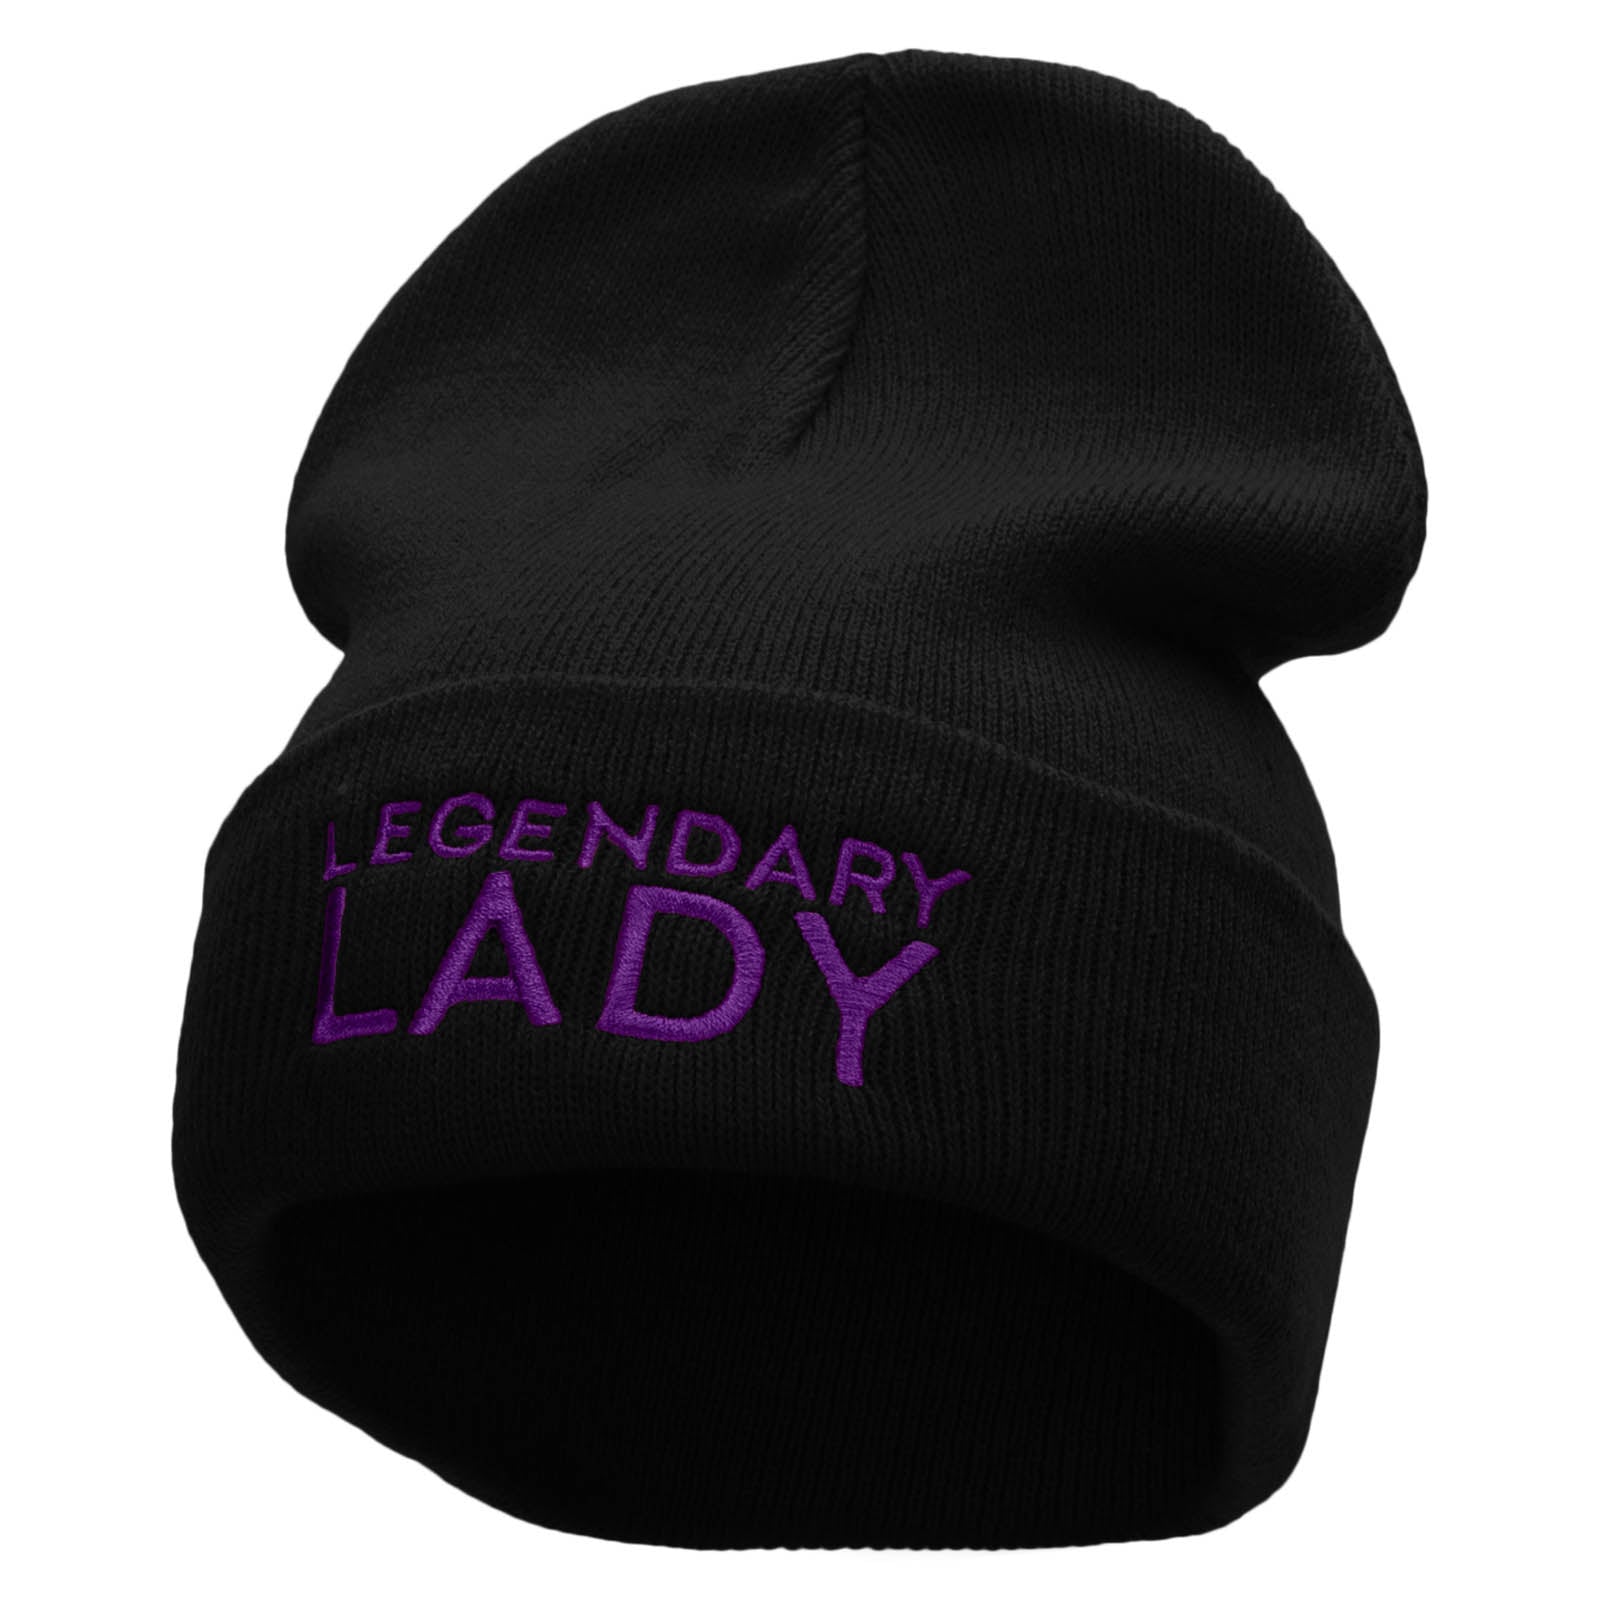 Legendary Lady Embroidered 12 Inch Long Knitted Beanie - Black OSFM